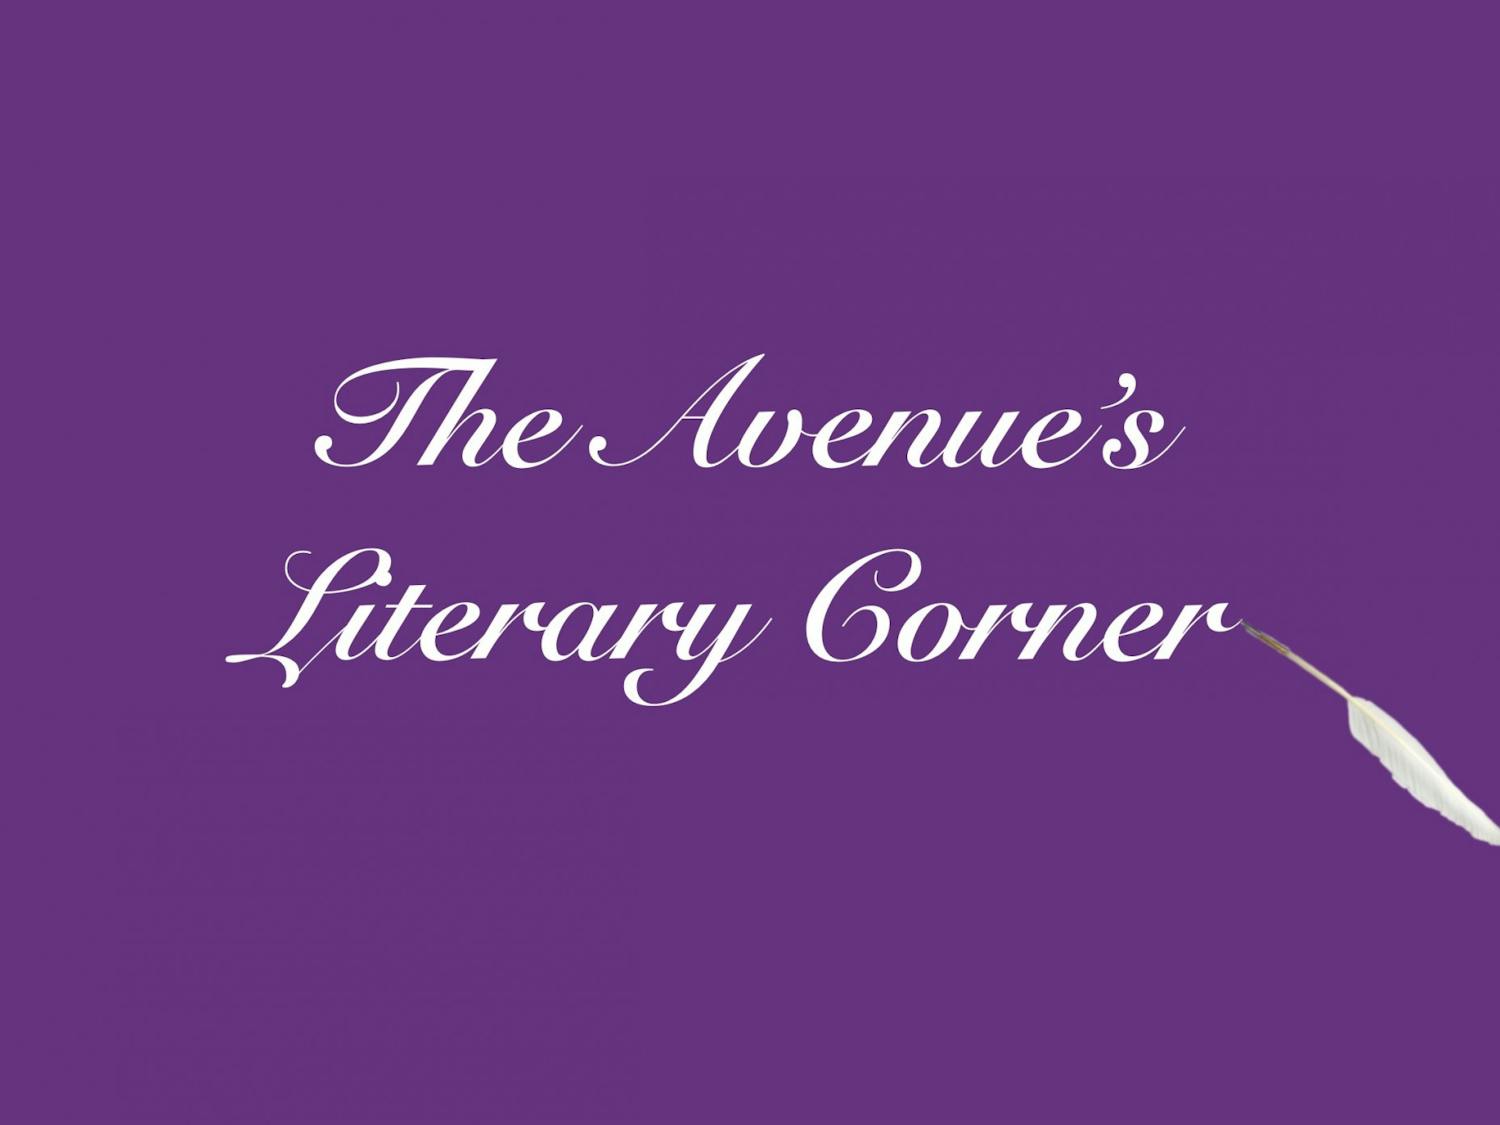 The Avenue&#x27;s Literary Corner features poetry, personal essays, short stories and other creative works from local writers. 